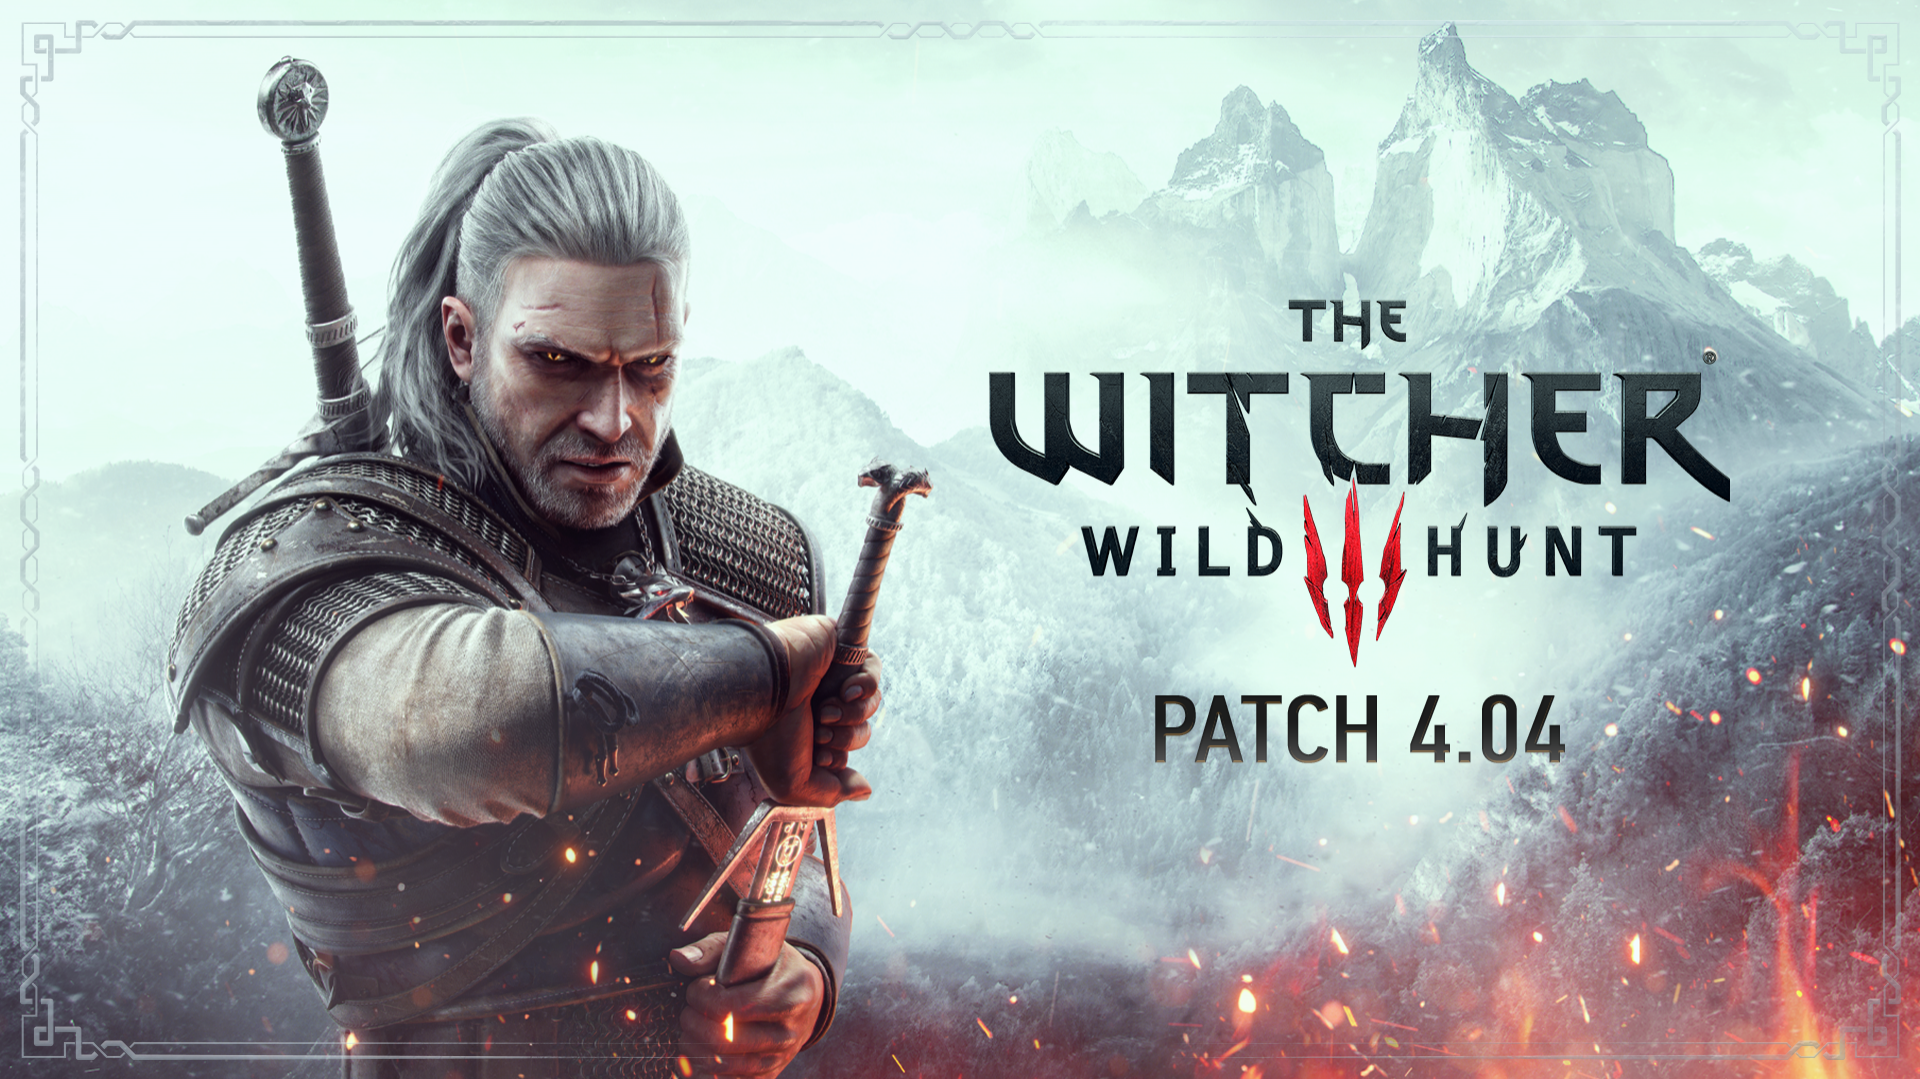 Which Witcher Is The Witcher 2, 2.0?